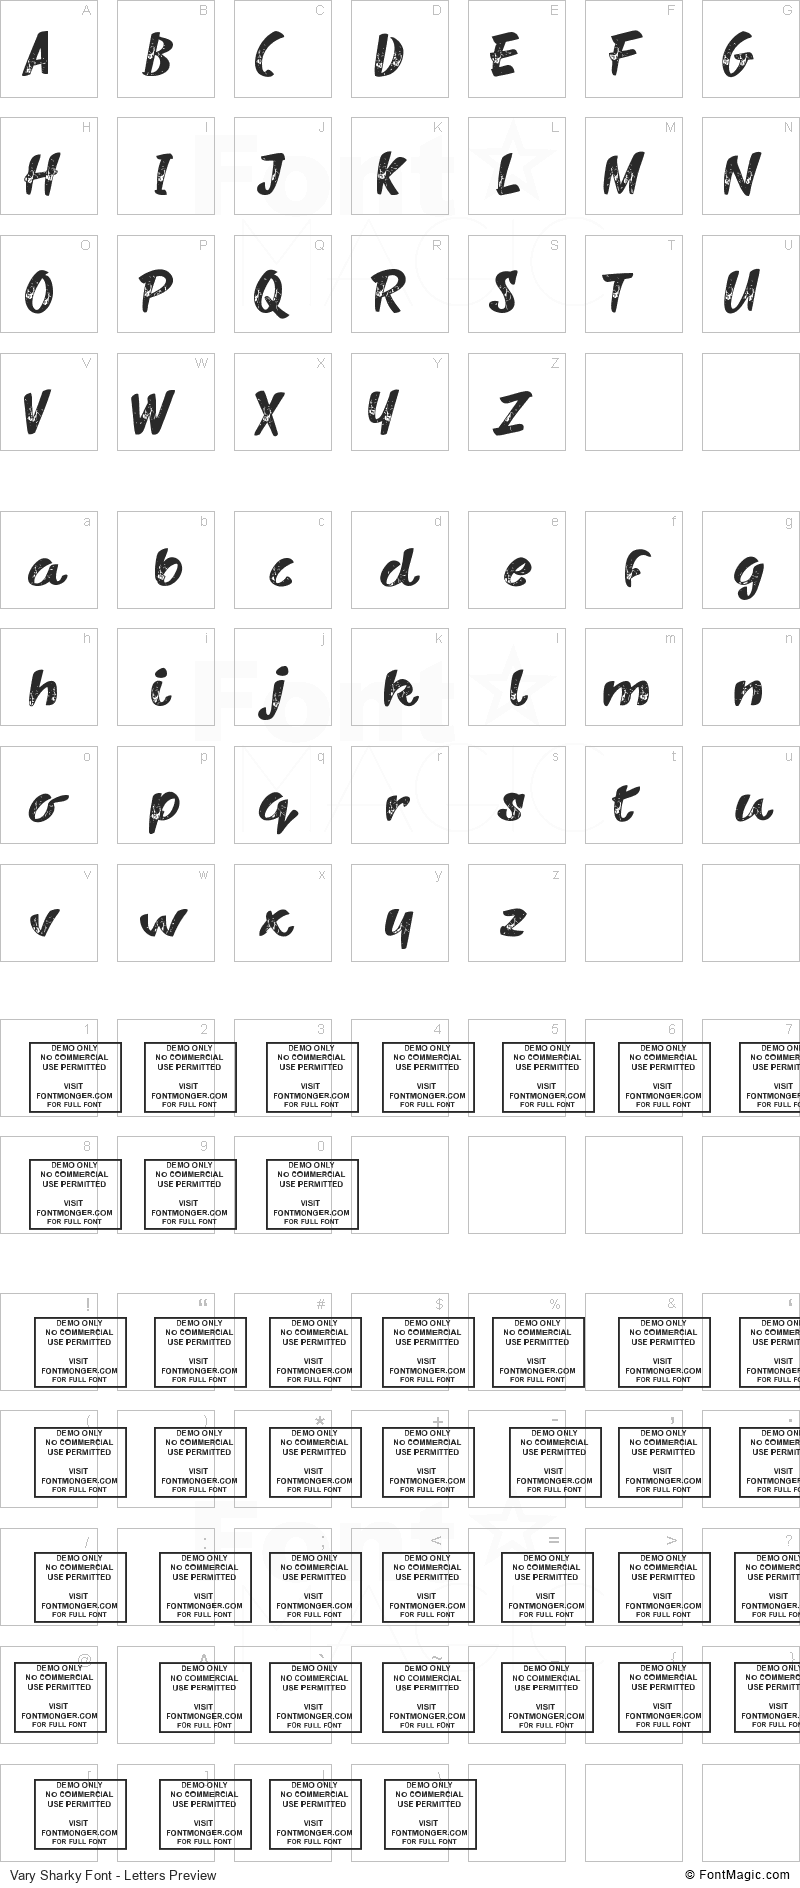 Vary Sharky Font - All Latters Preview Chart